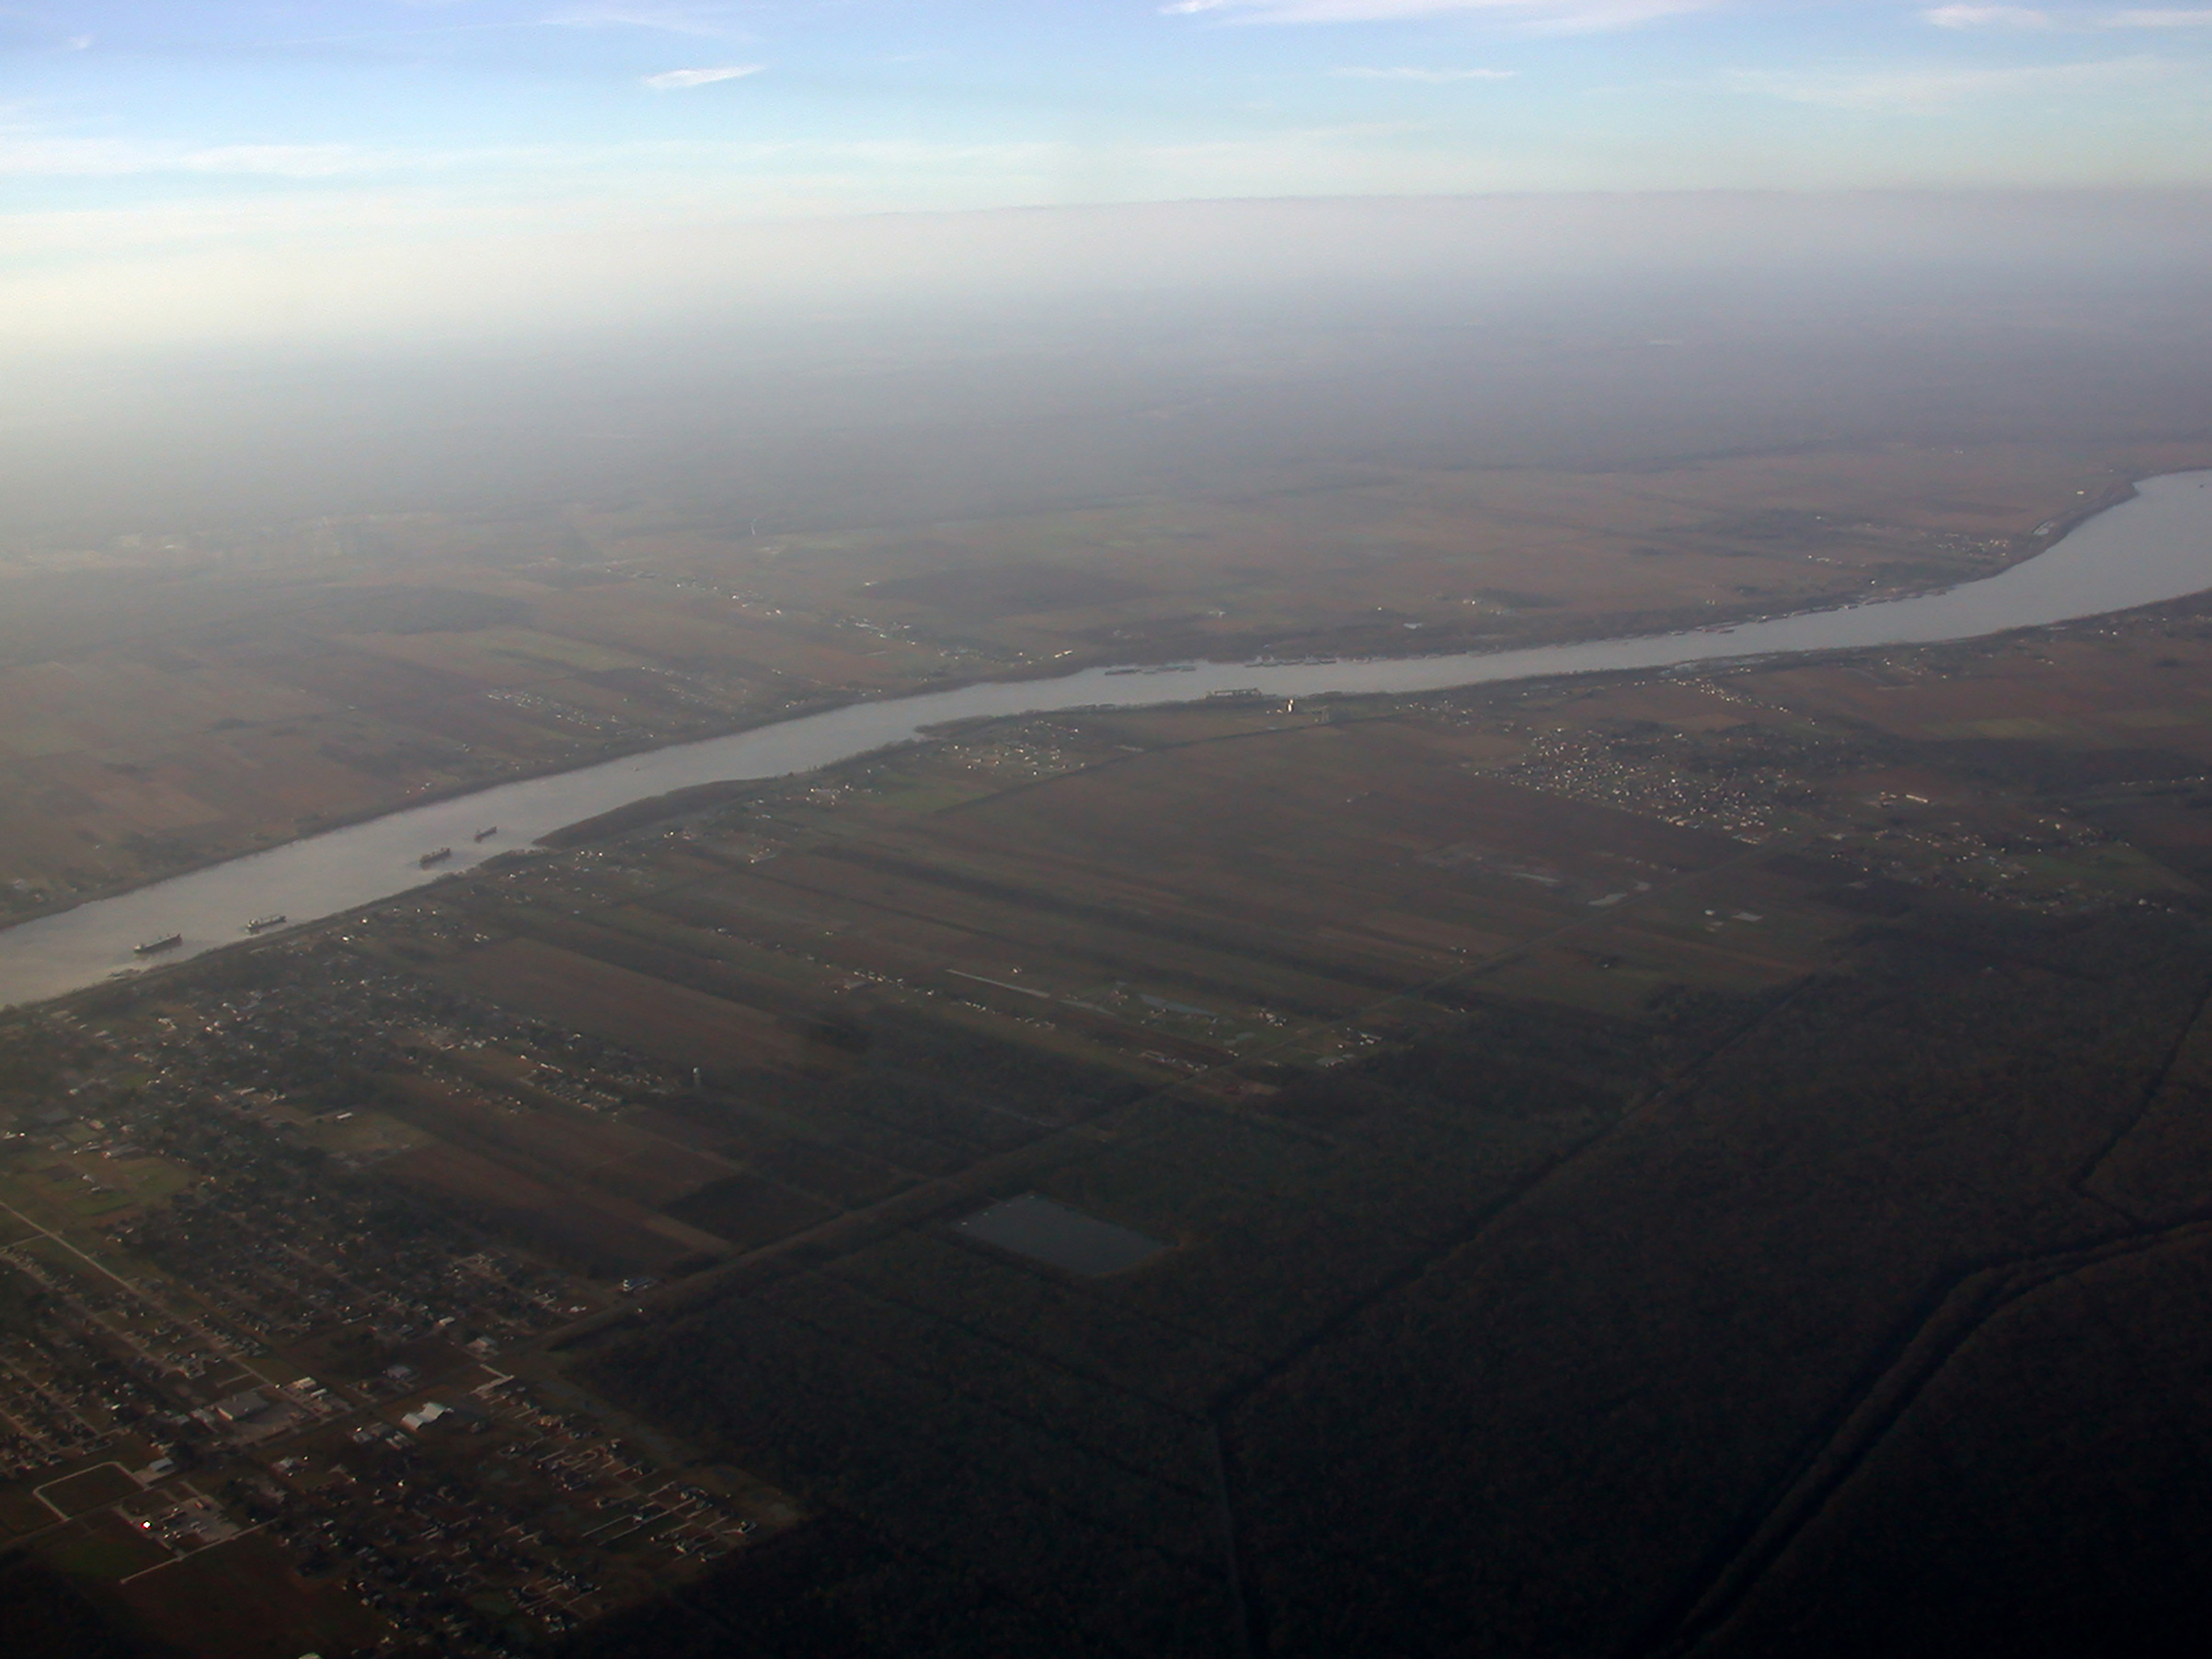 The Mississippi River, seen here north of New Orleans, feeds into the Port of South Louisiana, the largest port in the U.S. Port workers here have higher average starting salaries than workers in the tourism sector (Stacy Kranitz)